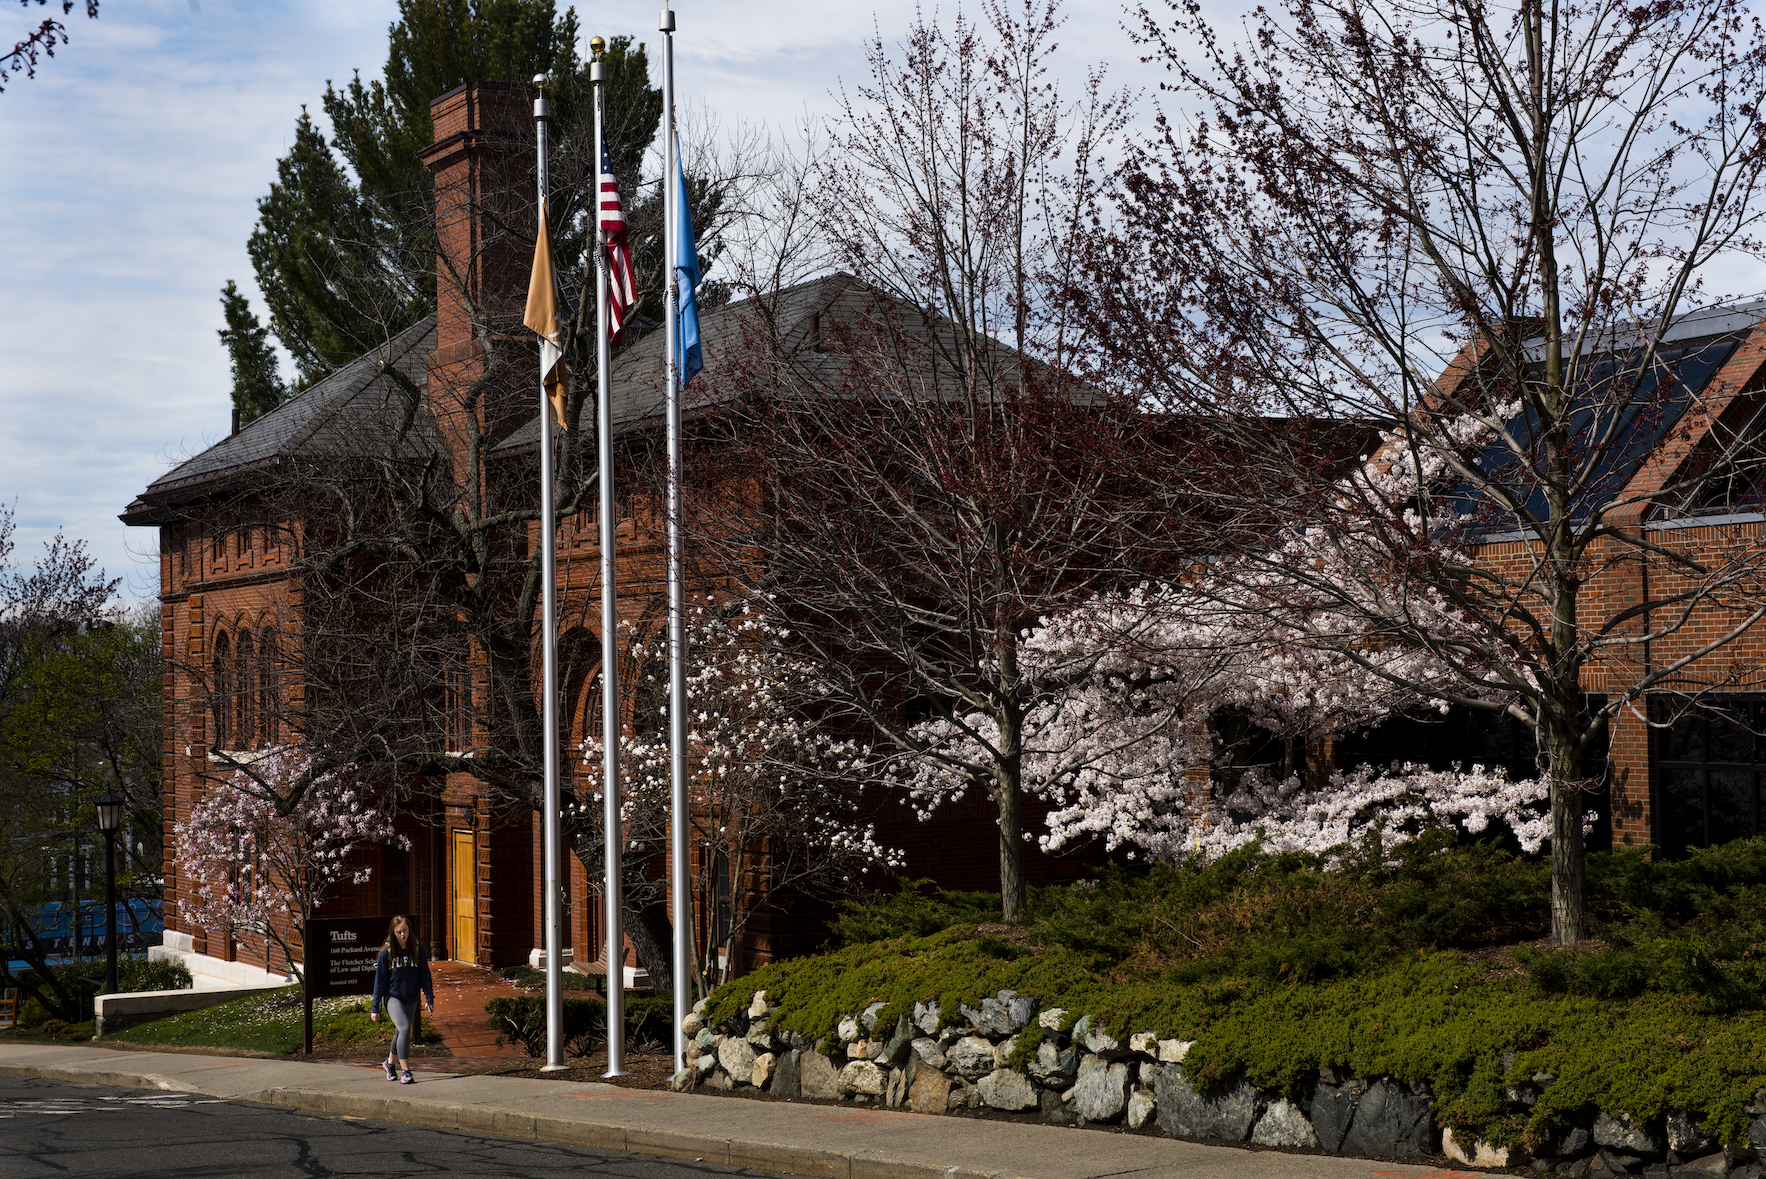 An image of a blossomed cherry tree at the exterior of the Packard Avenue entrance to the Fletcher School of Law and Diplomacy at Tufts University.